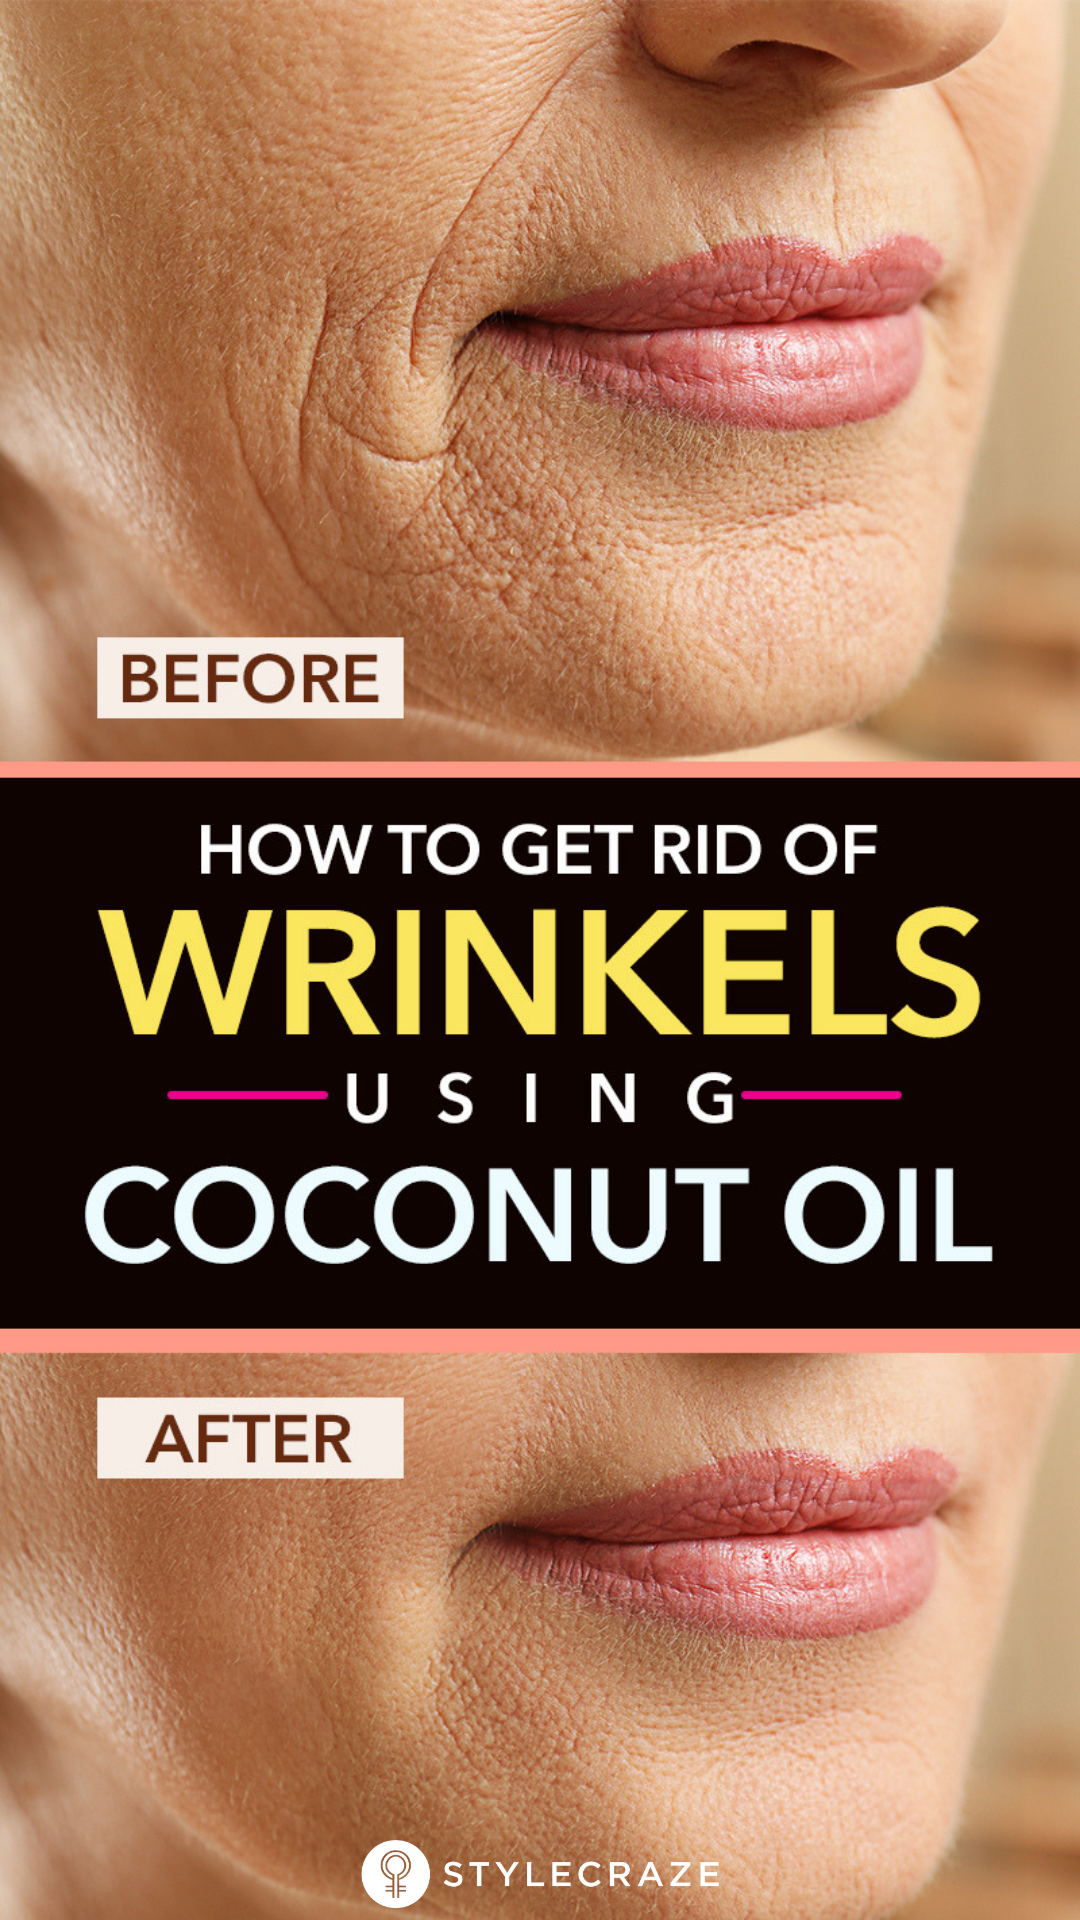 How To Get Rid Of Wrinkles Using Coconut Oil -   15 skin care For Wrinkles products ideas